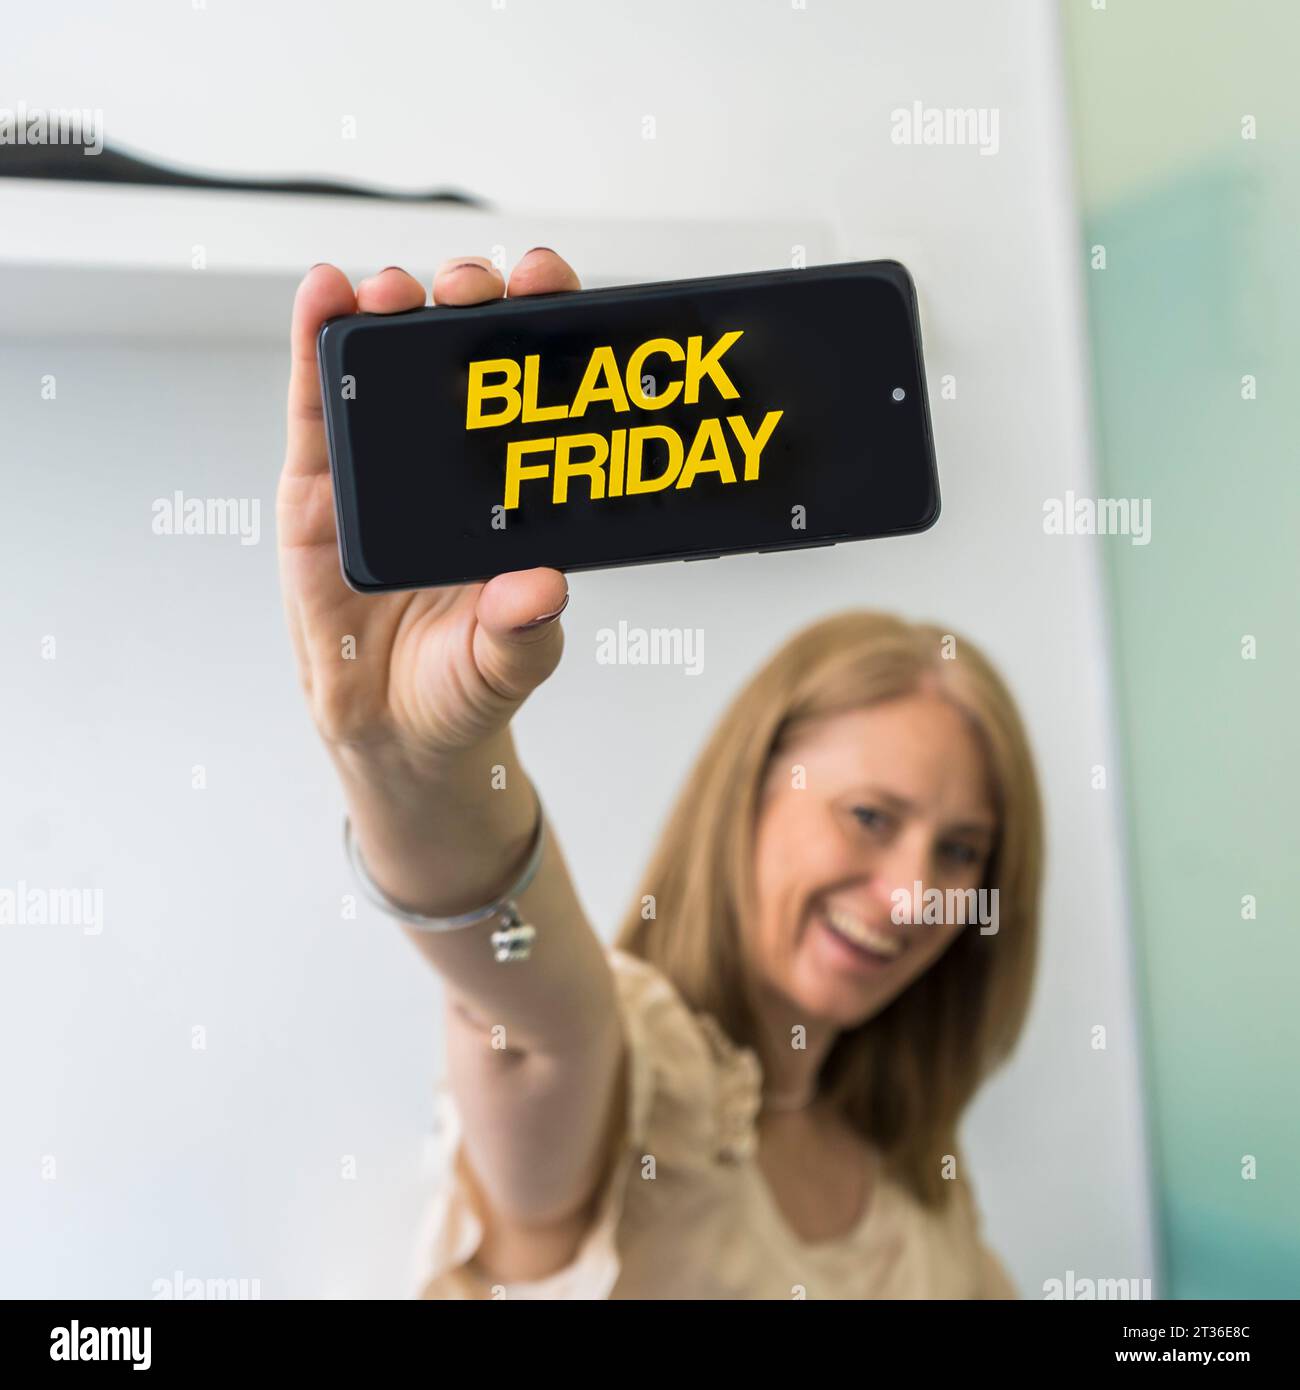 A woman showing a smartphone with Black Friday advertisement on the screen. Stock Photo